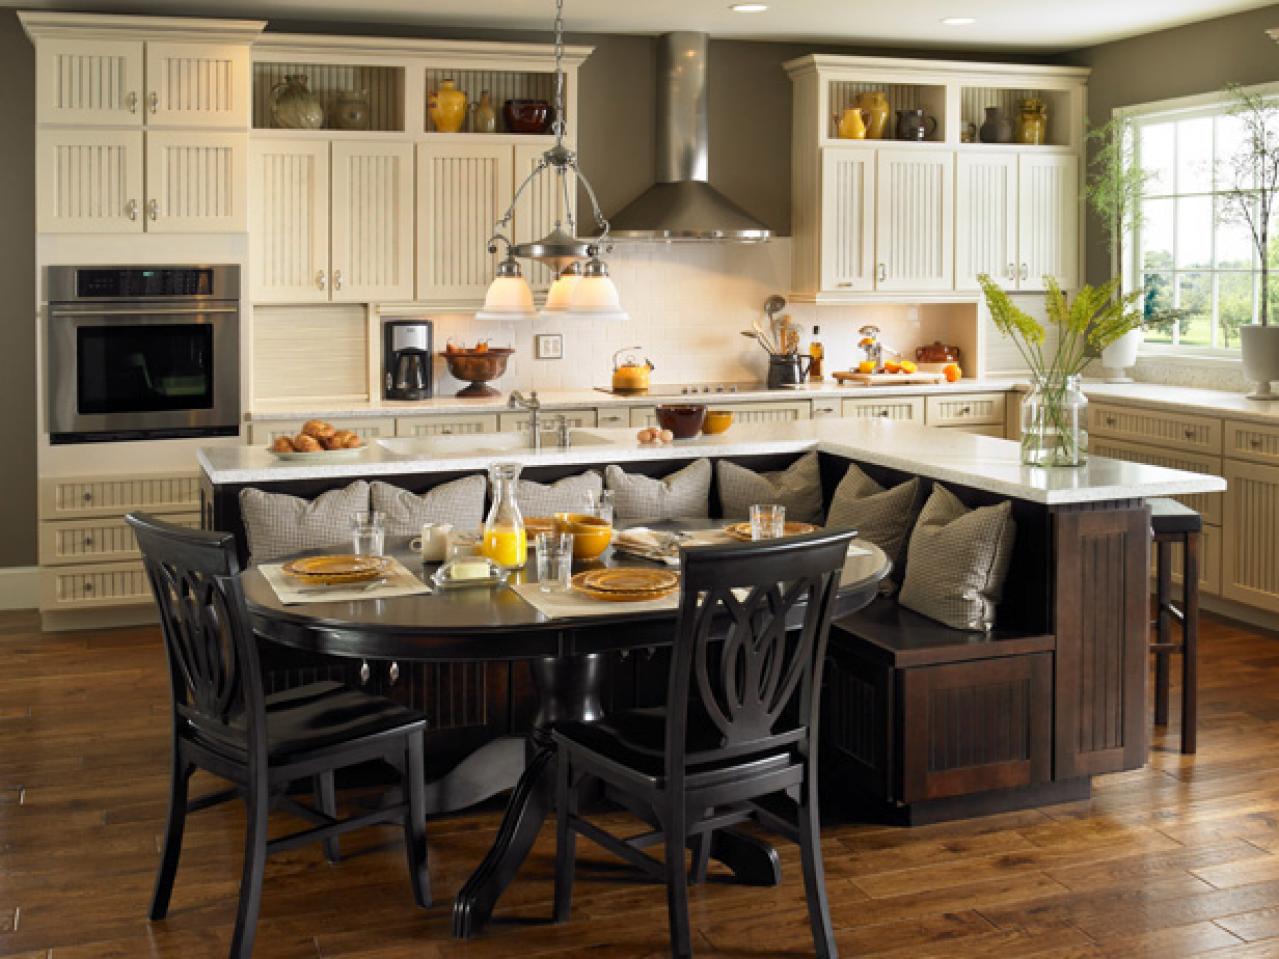 Kitchen Island Table Ideas and Options + HGTV Pictures   HGTV